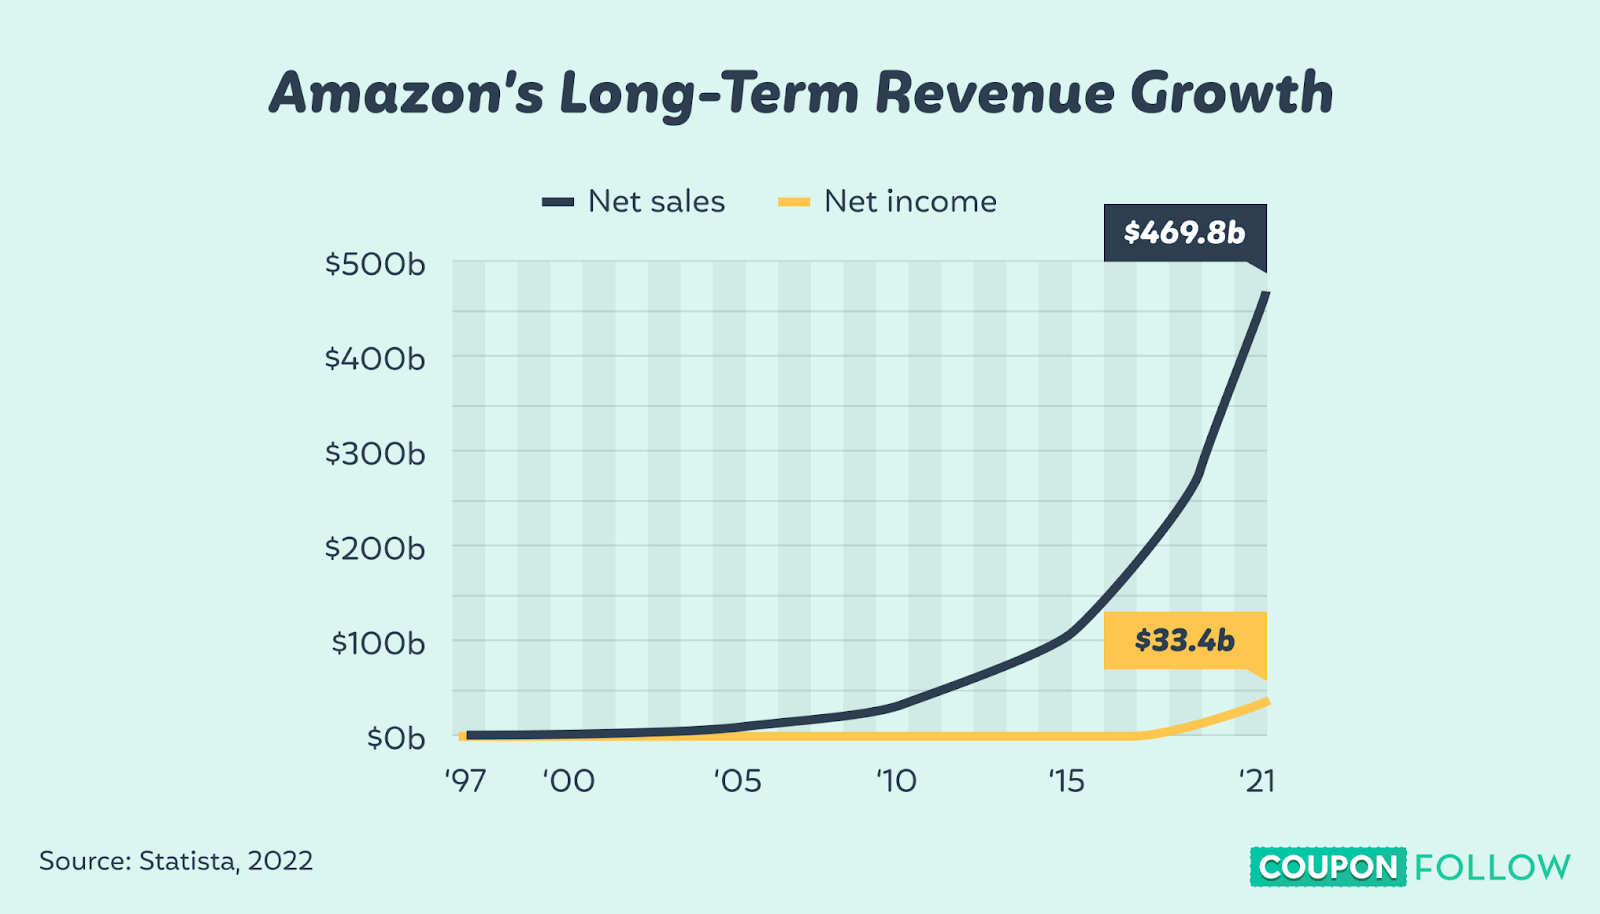 graph depicting amazon’s revenue growth from 1997 to 2021